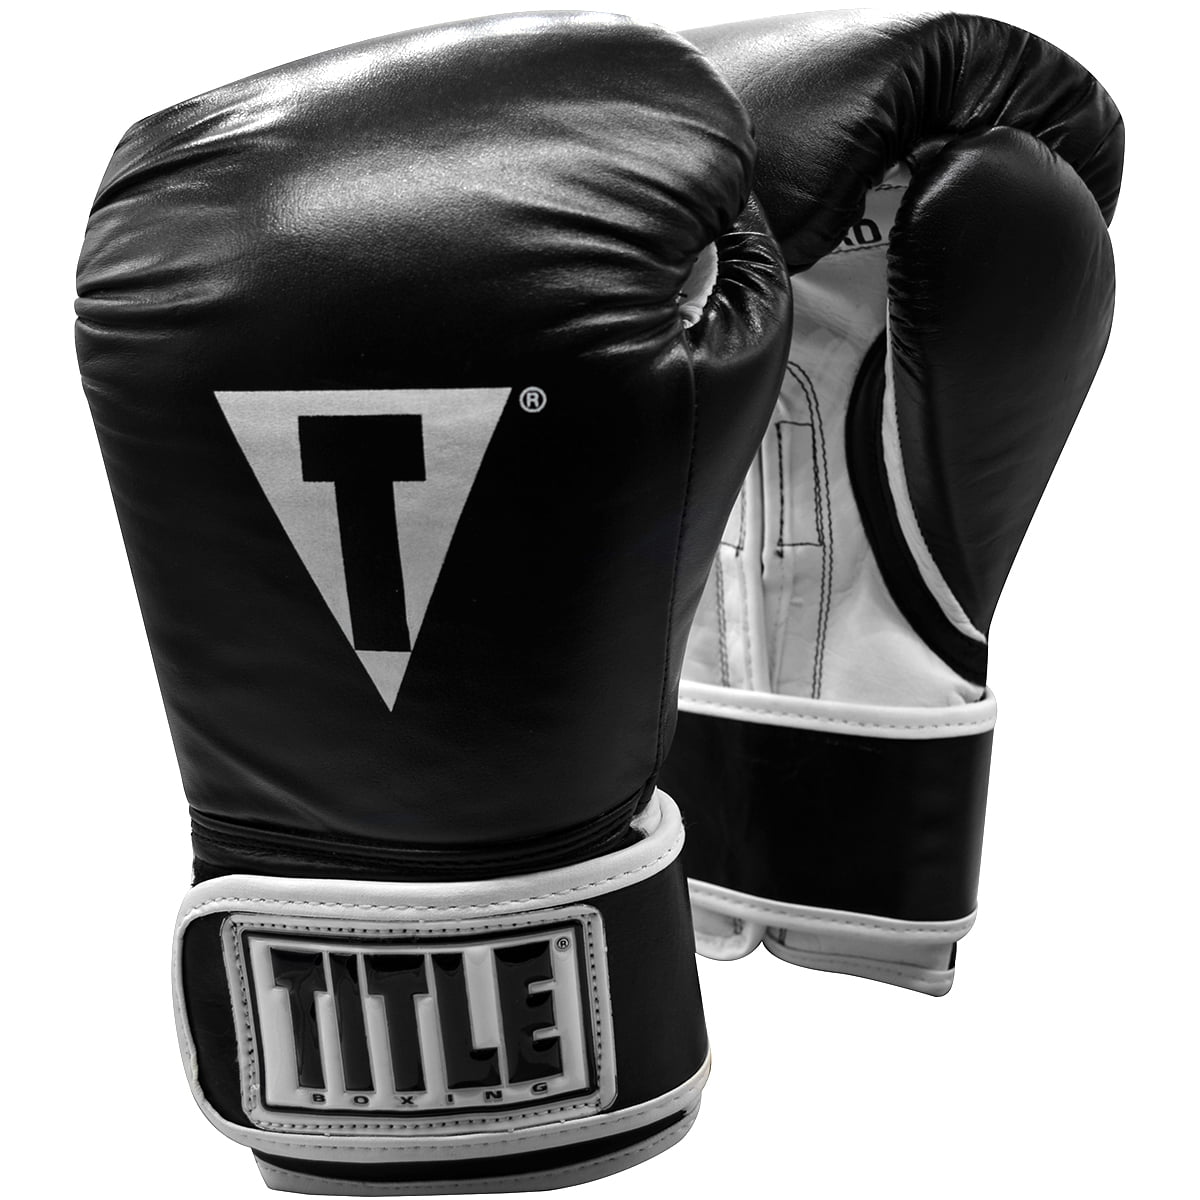 TITLE Boxing Pro Style Leather Training Gloves 